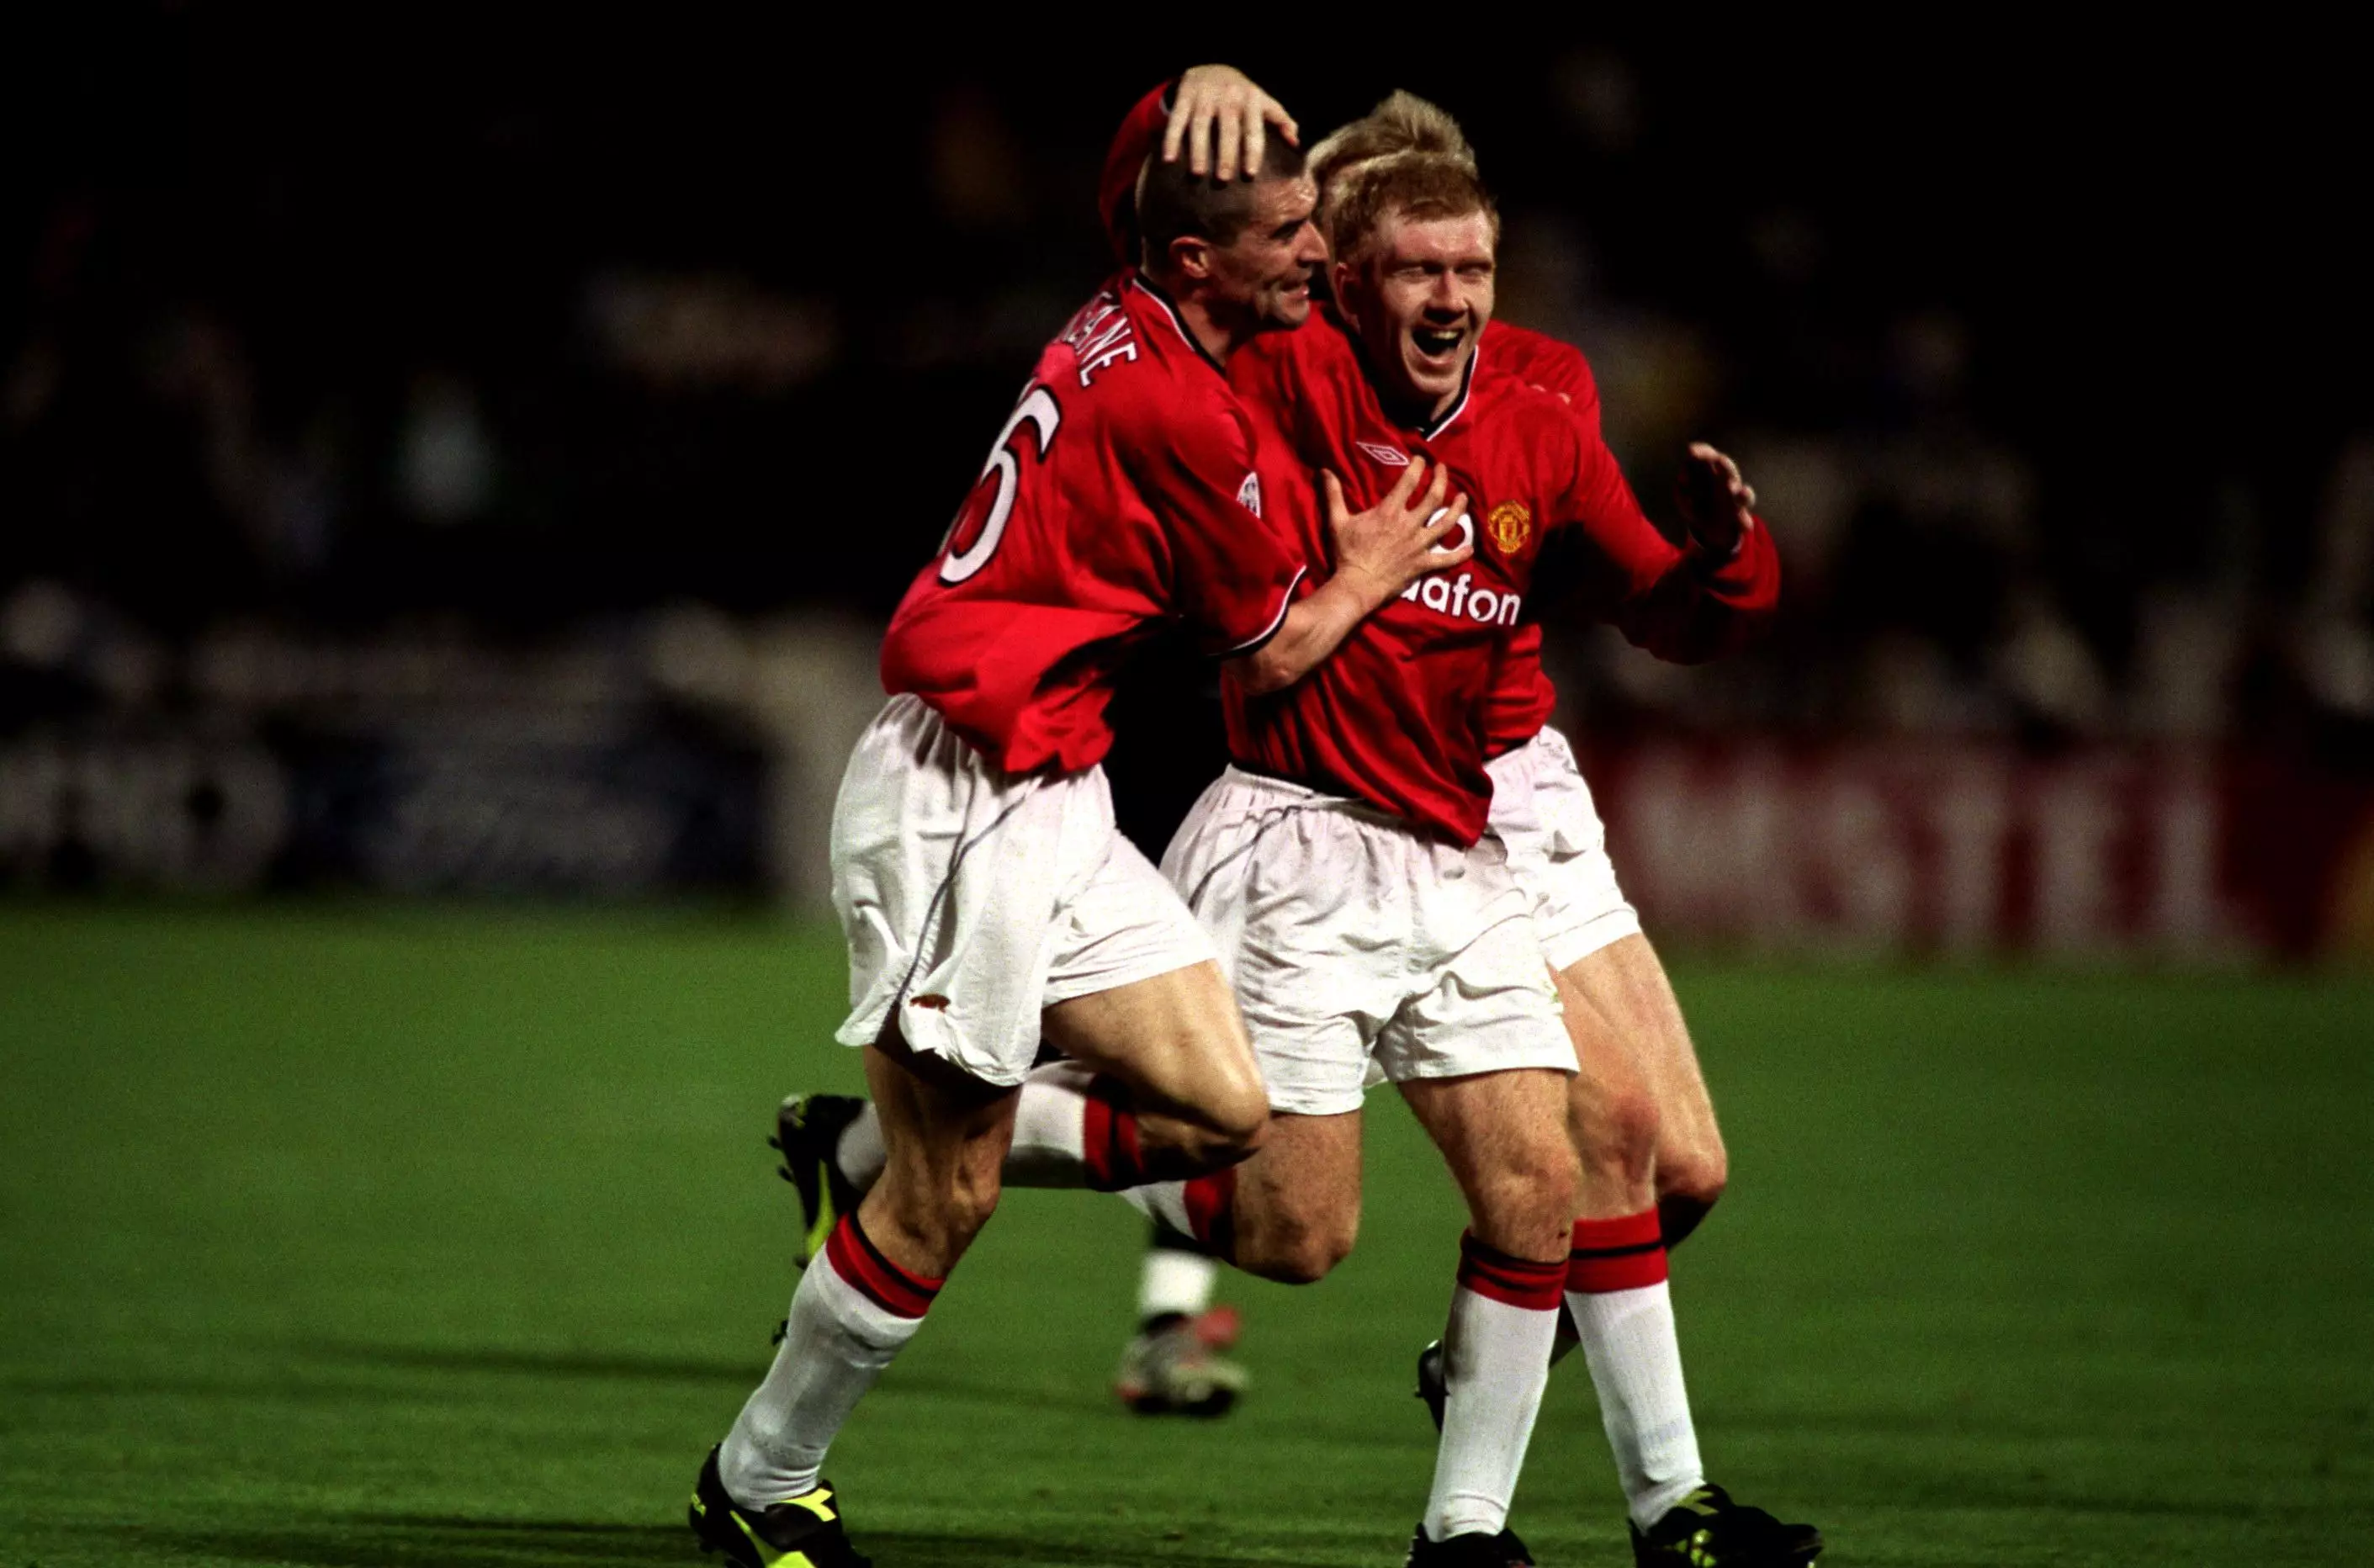 Keane and Scholes were the original great midfield pairing for United. Image: PA Images